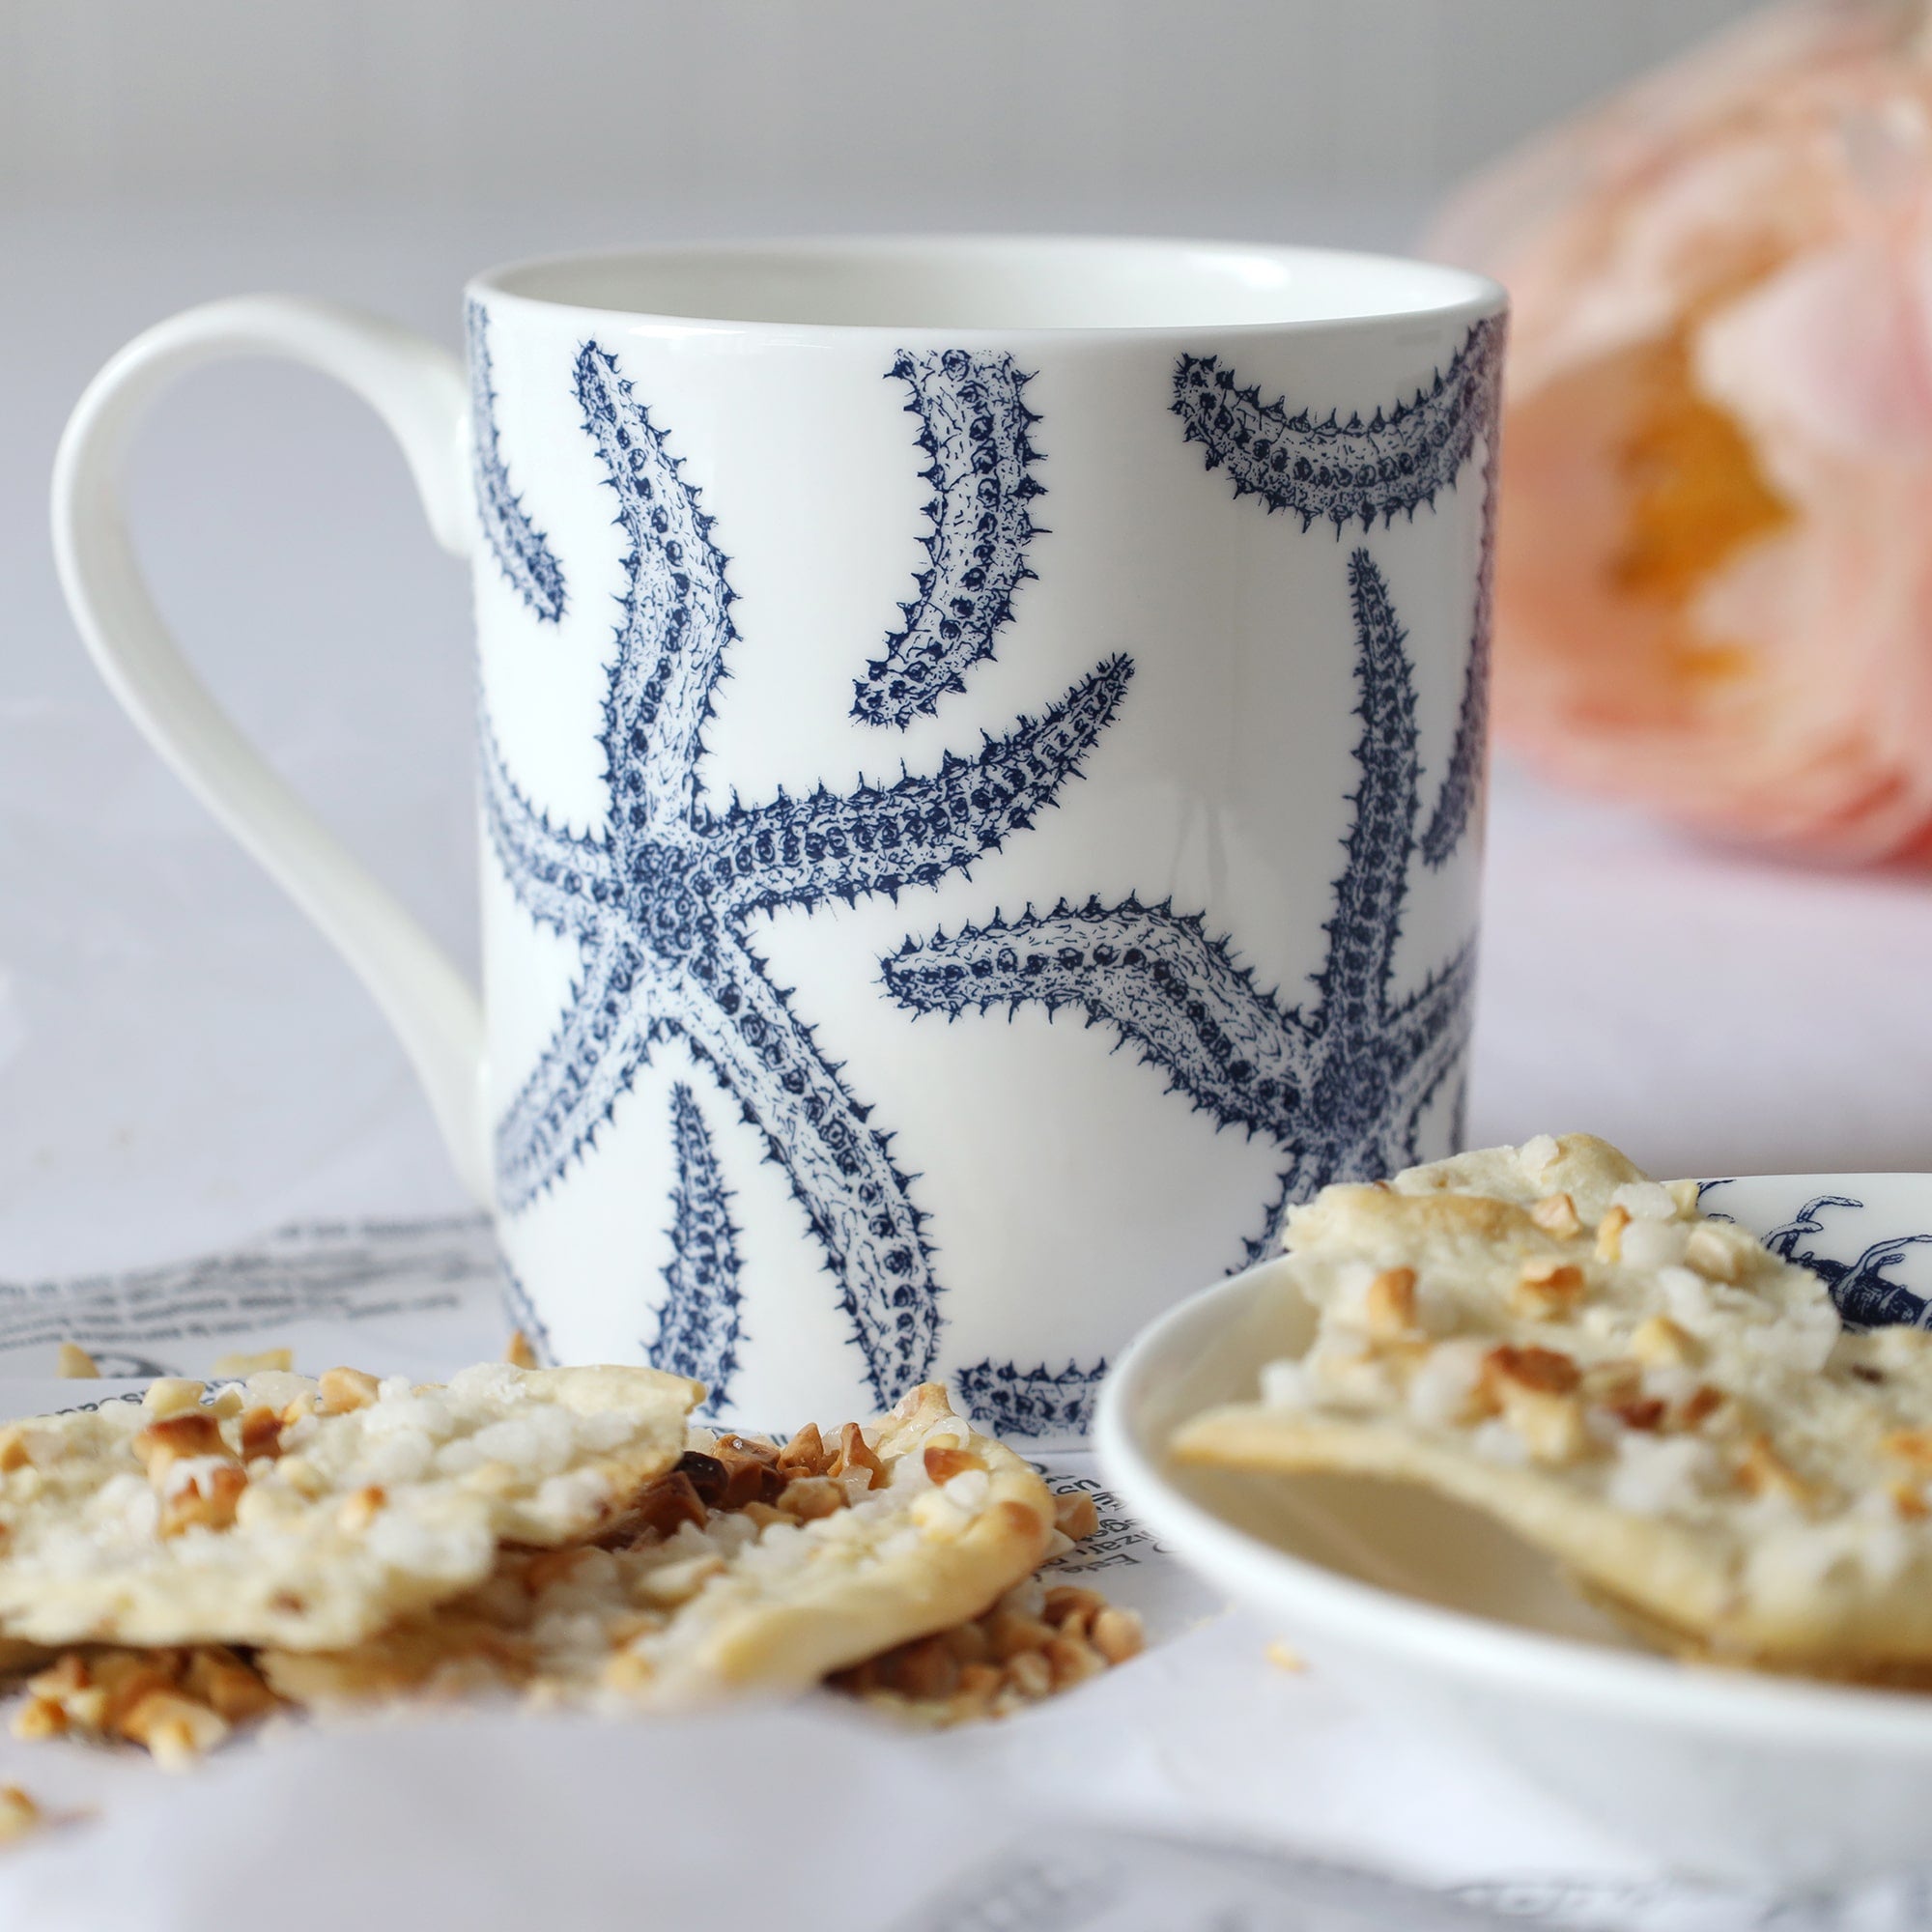 White mug with dark blue multiple starfish illustration sitting on a table with a plate & biscuits and flowers in the background.